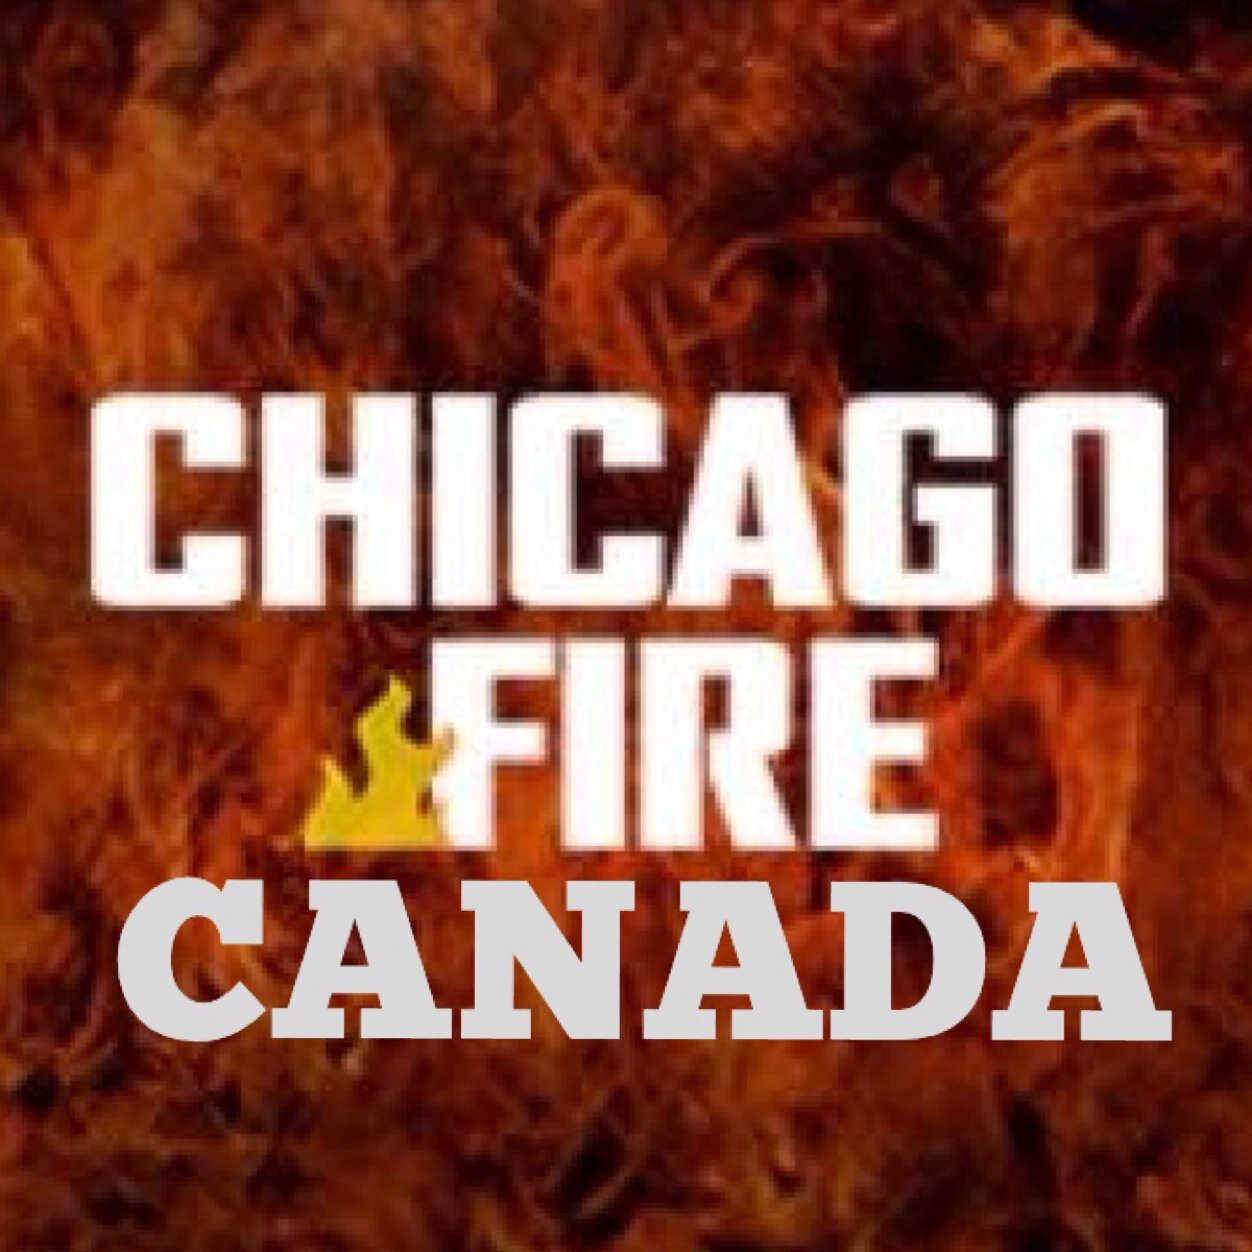 All things Chicago Fire!! Tune in for season 4 premiering in the US on Tuesday, October 13th, 2015 at 10/9c on @NBC!